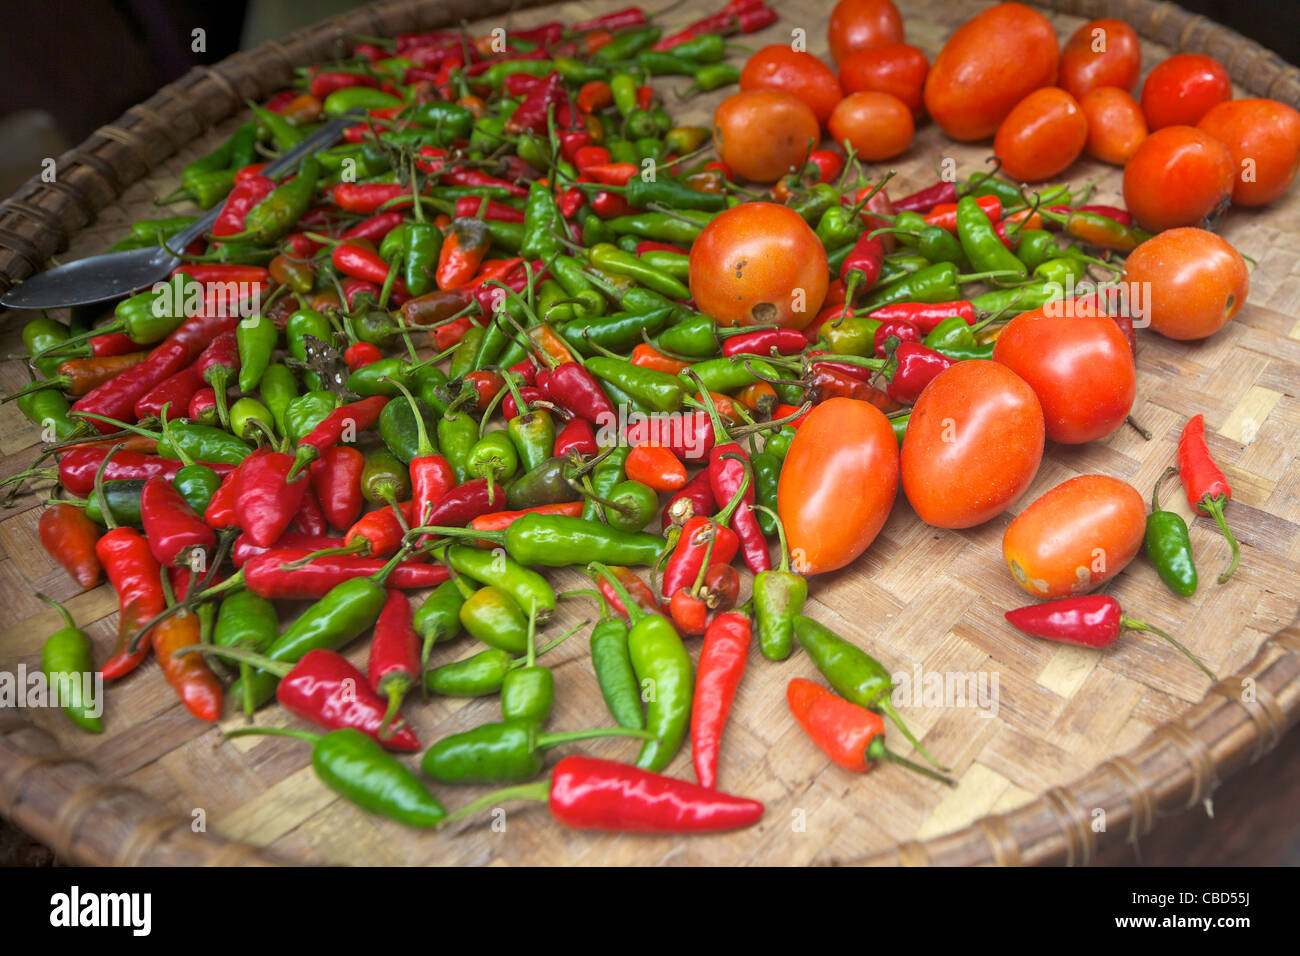 Tomatoes, green and red peppers, Nepal, Asia Stock Photo